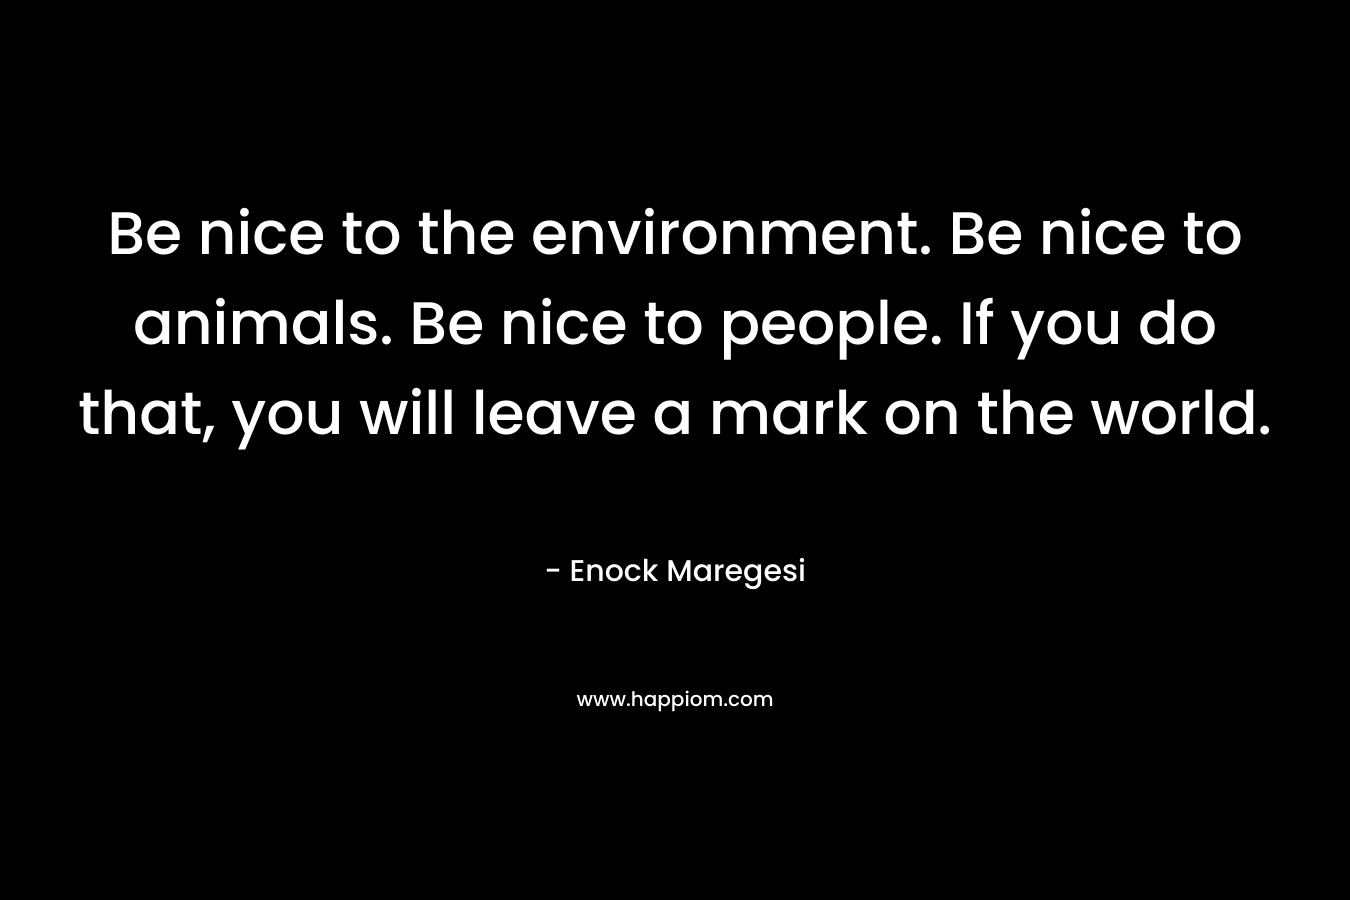 Be nice to the environment. Be nice to animals. Be nice to people. If you do that, you will leave a mark on the world.